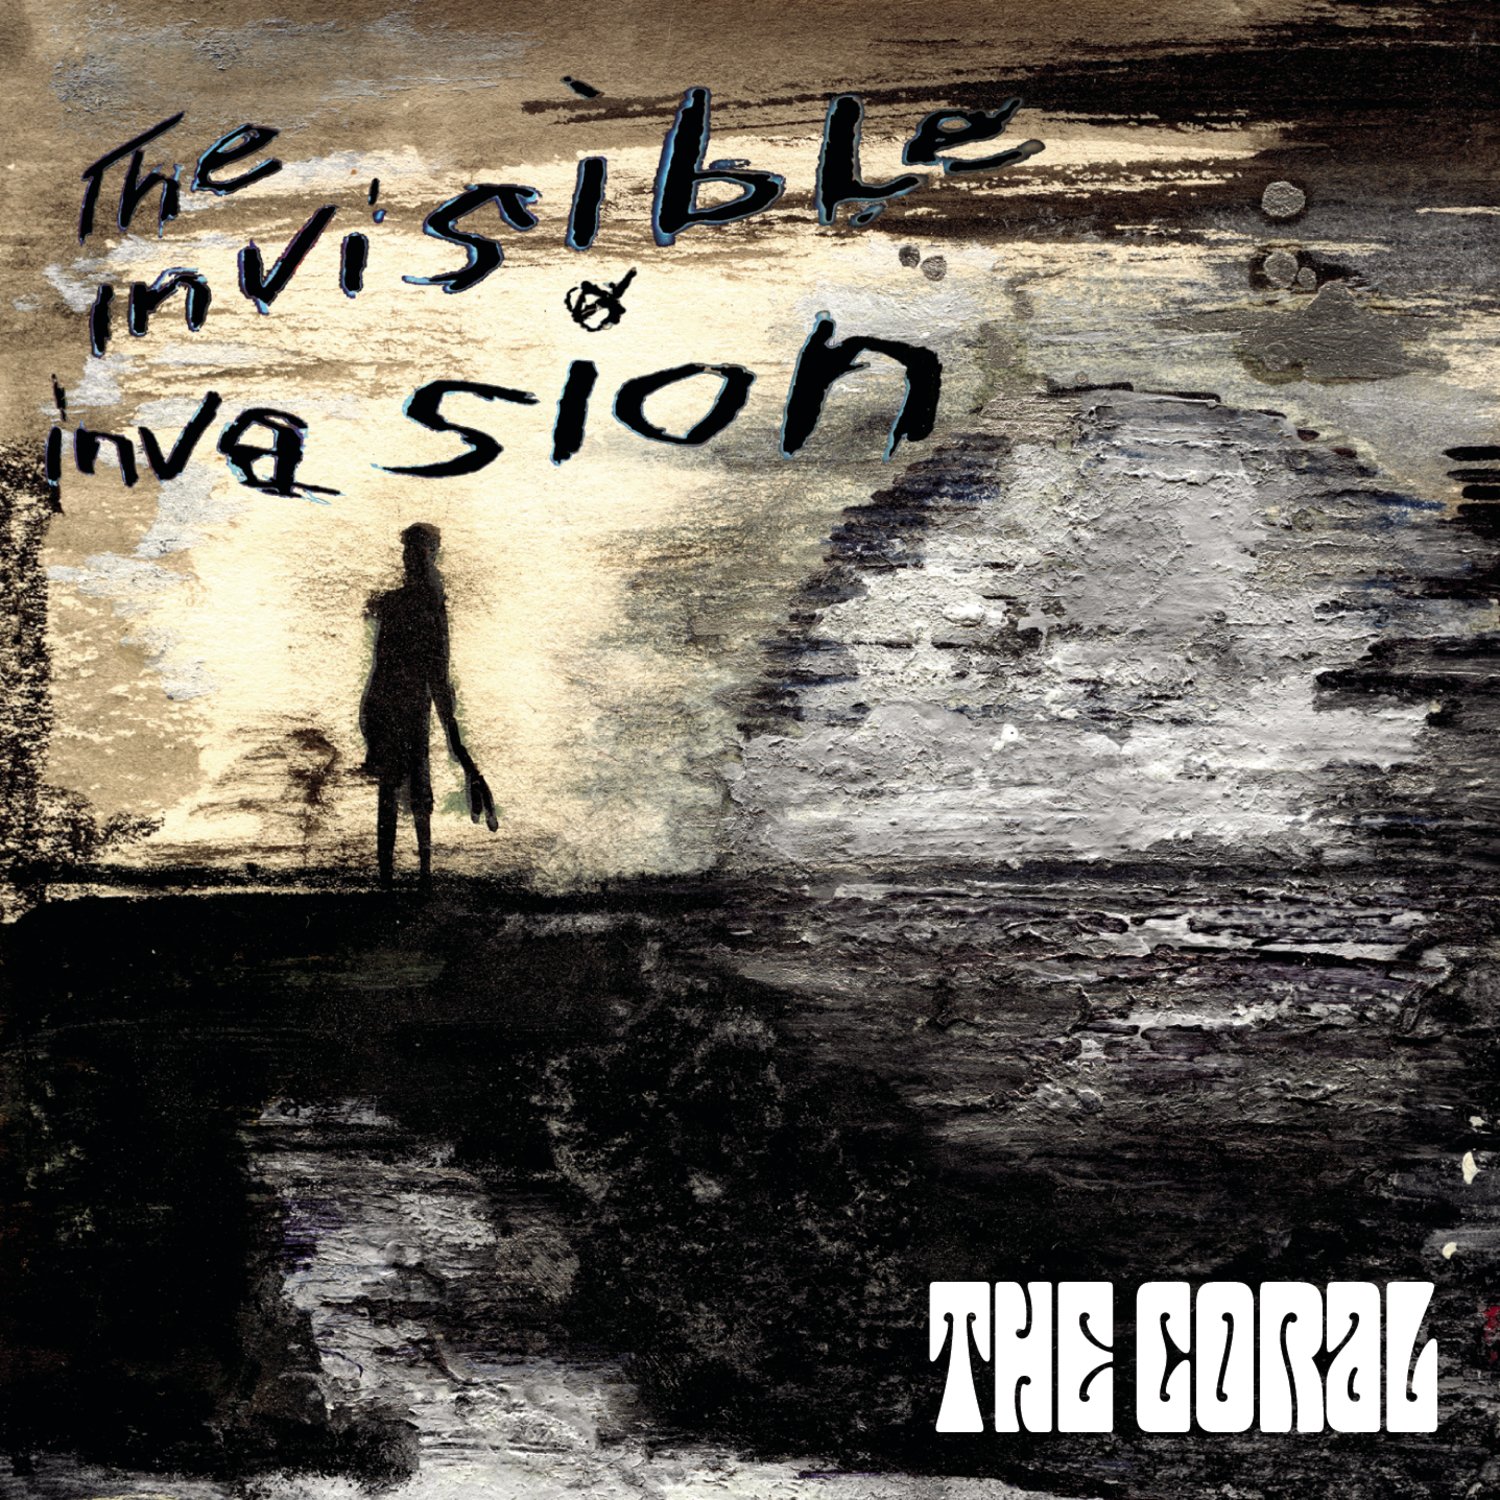 The Coral The invisible invasion